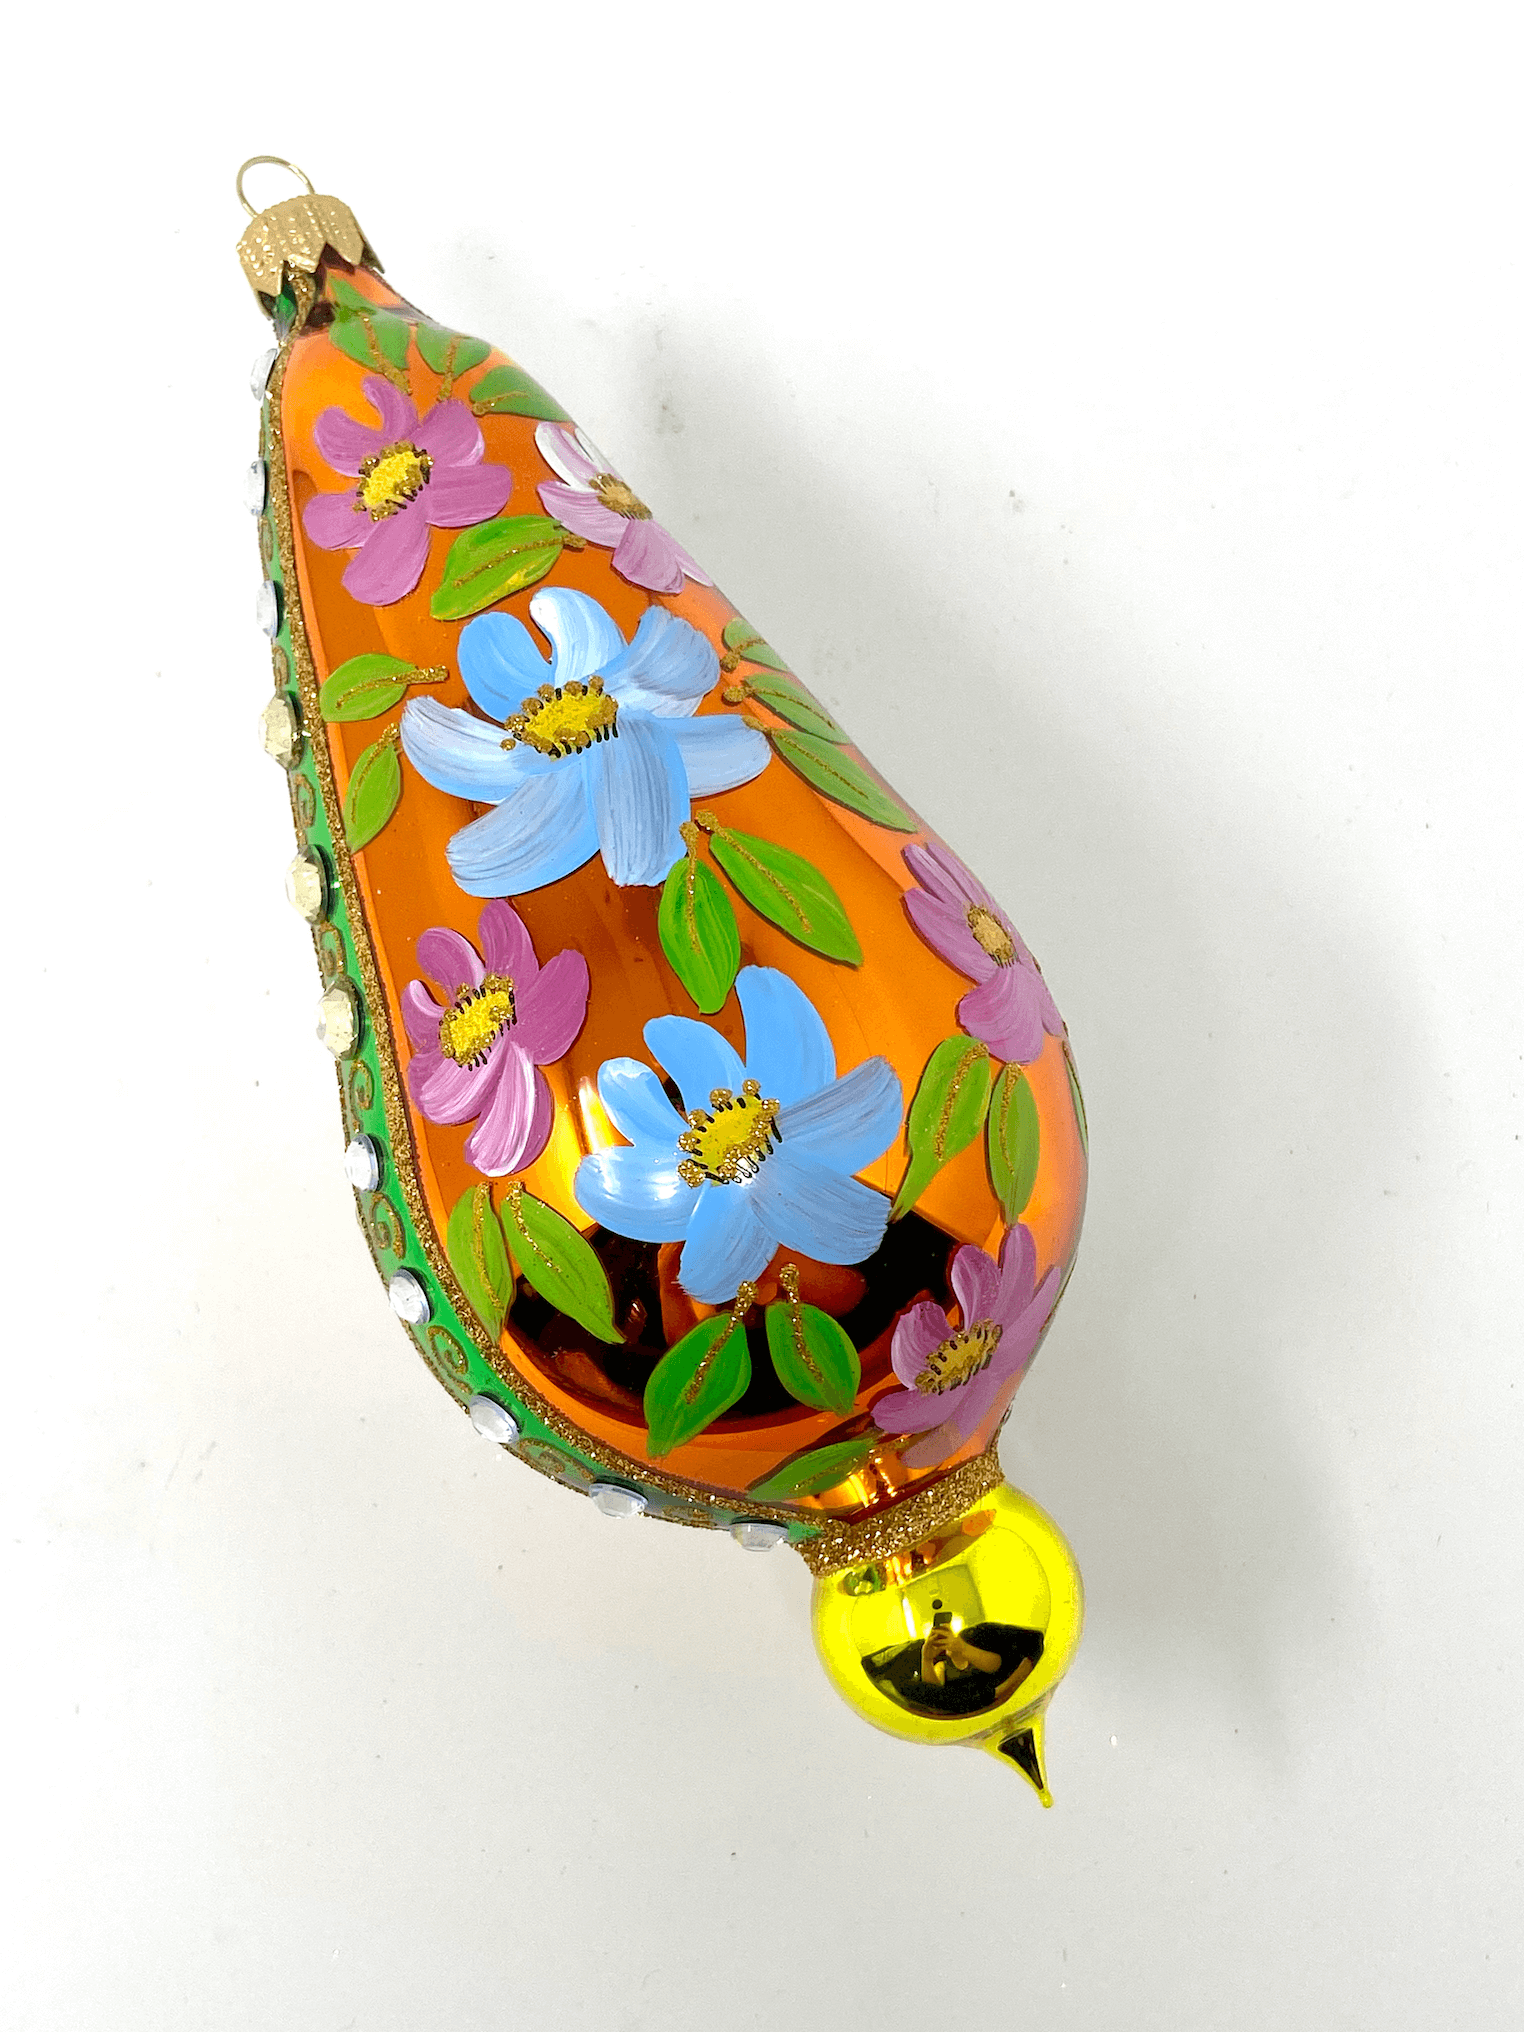 Orange eggplant shaped ornament featuring gemstones, intricate gold detailing, and hand painted floral blooms. A Christmas polish glass ornament. Floral Escape Floral Fetish.